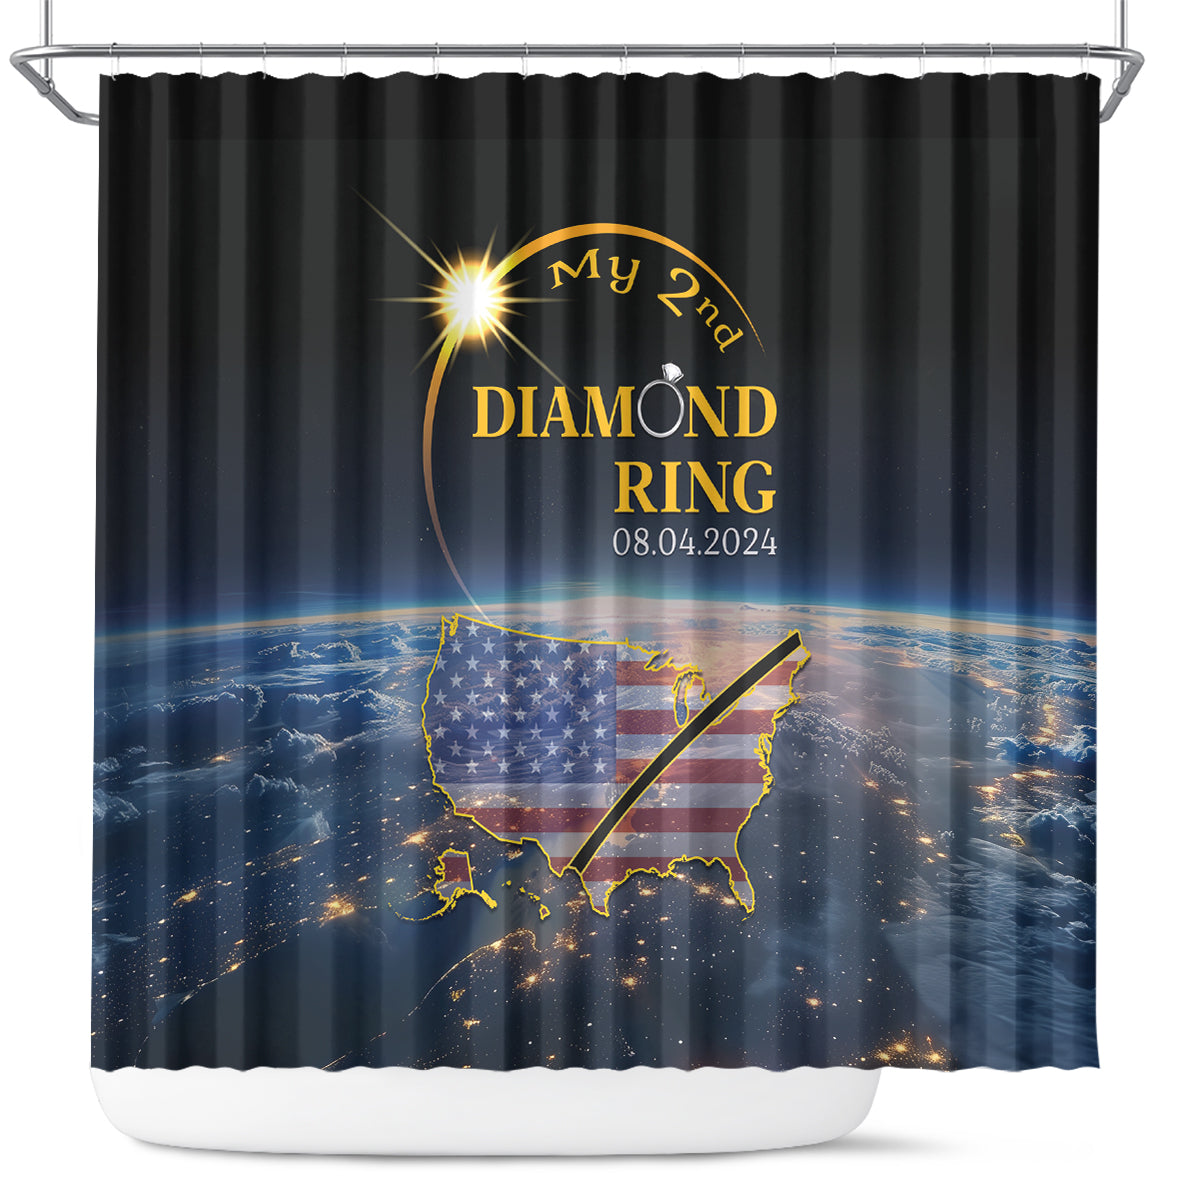 Total Solar Eclipse 2024 Shower Curtain My 2nd Diamond Ring